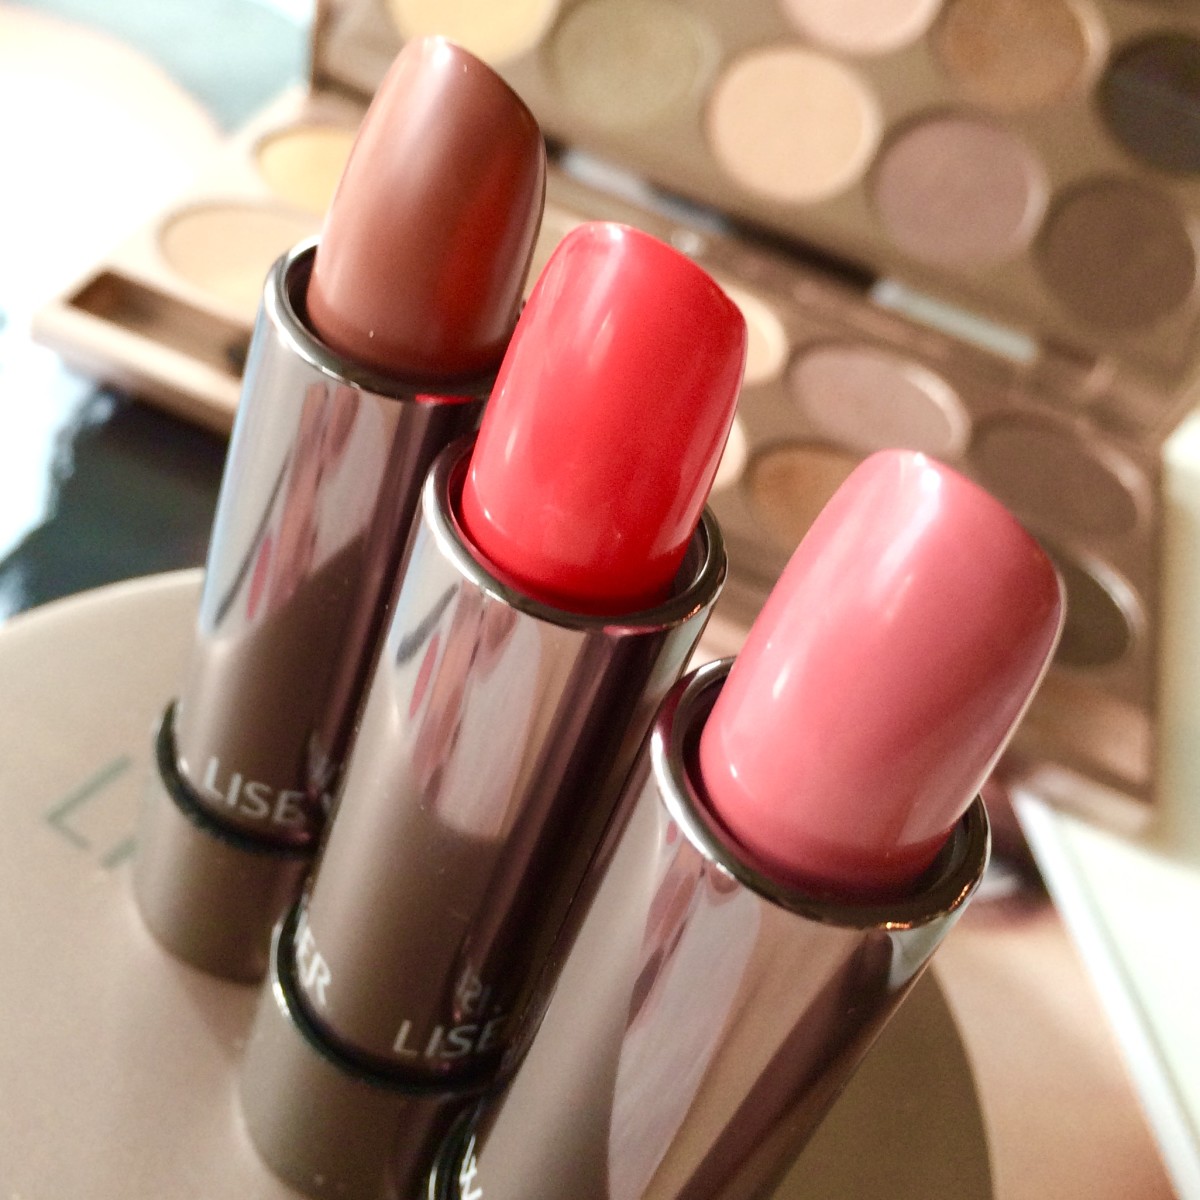 Lise Watier Rouges Sublime Lipsticks in Ginger_Eclectique_Amour